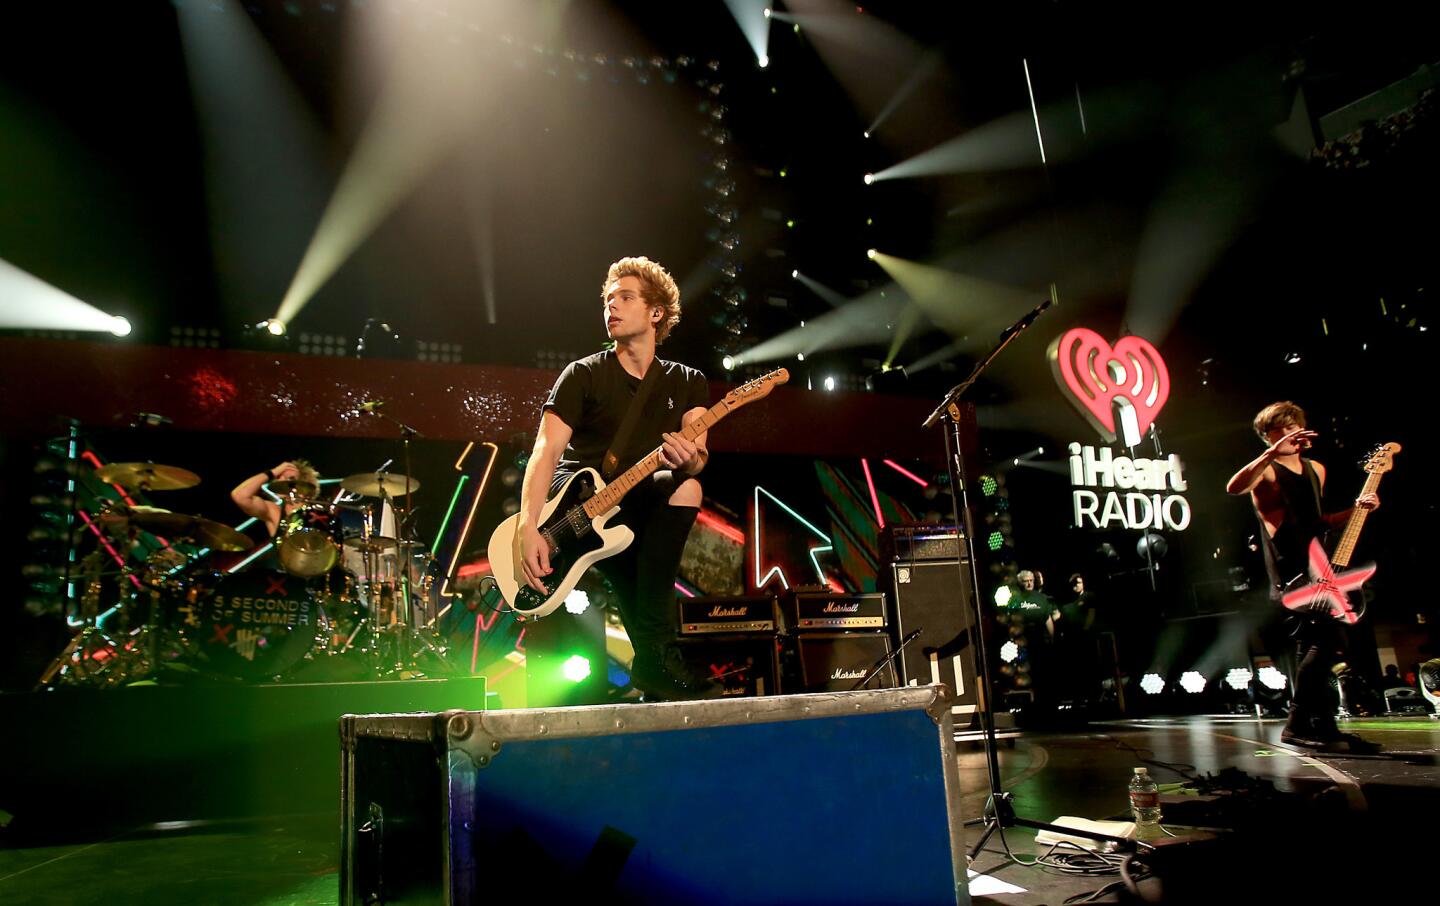 5 Seconds of Summer performs at KIIS-FM's annual Jingle Ball concert at Staples Center in Los Angeles.